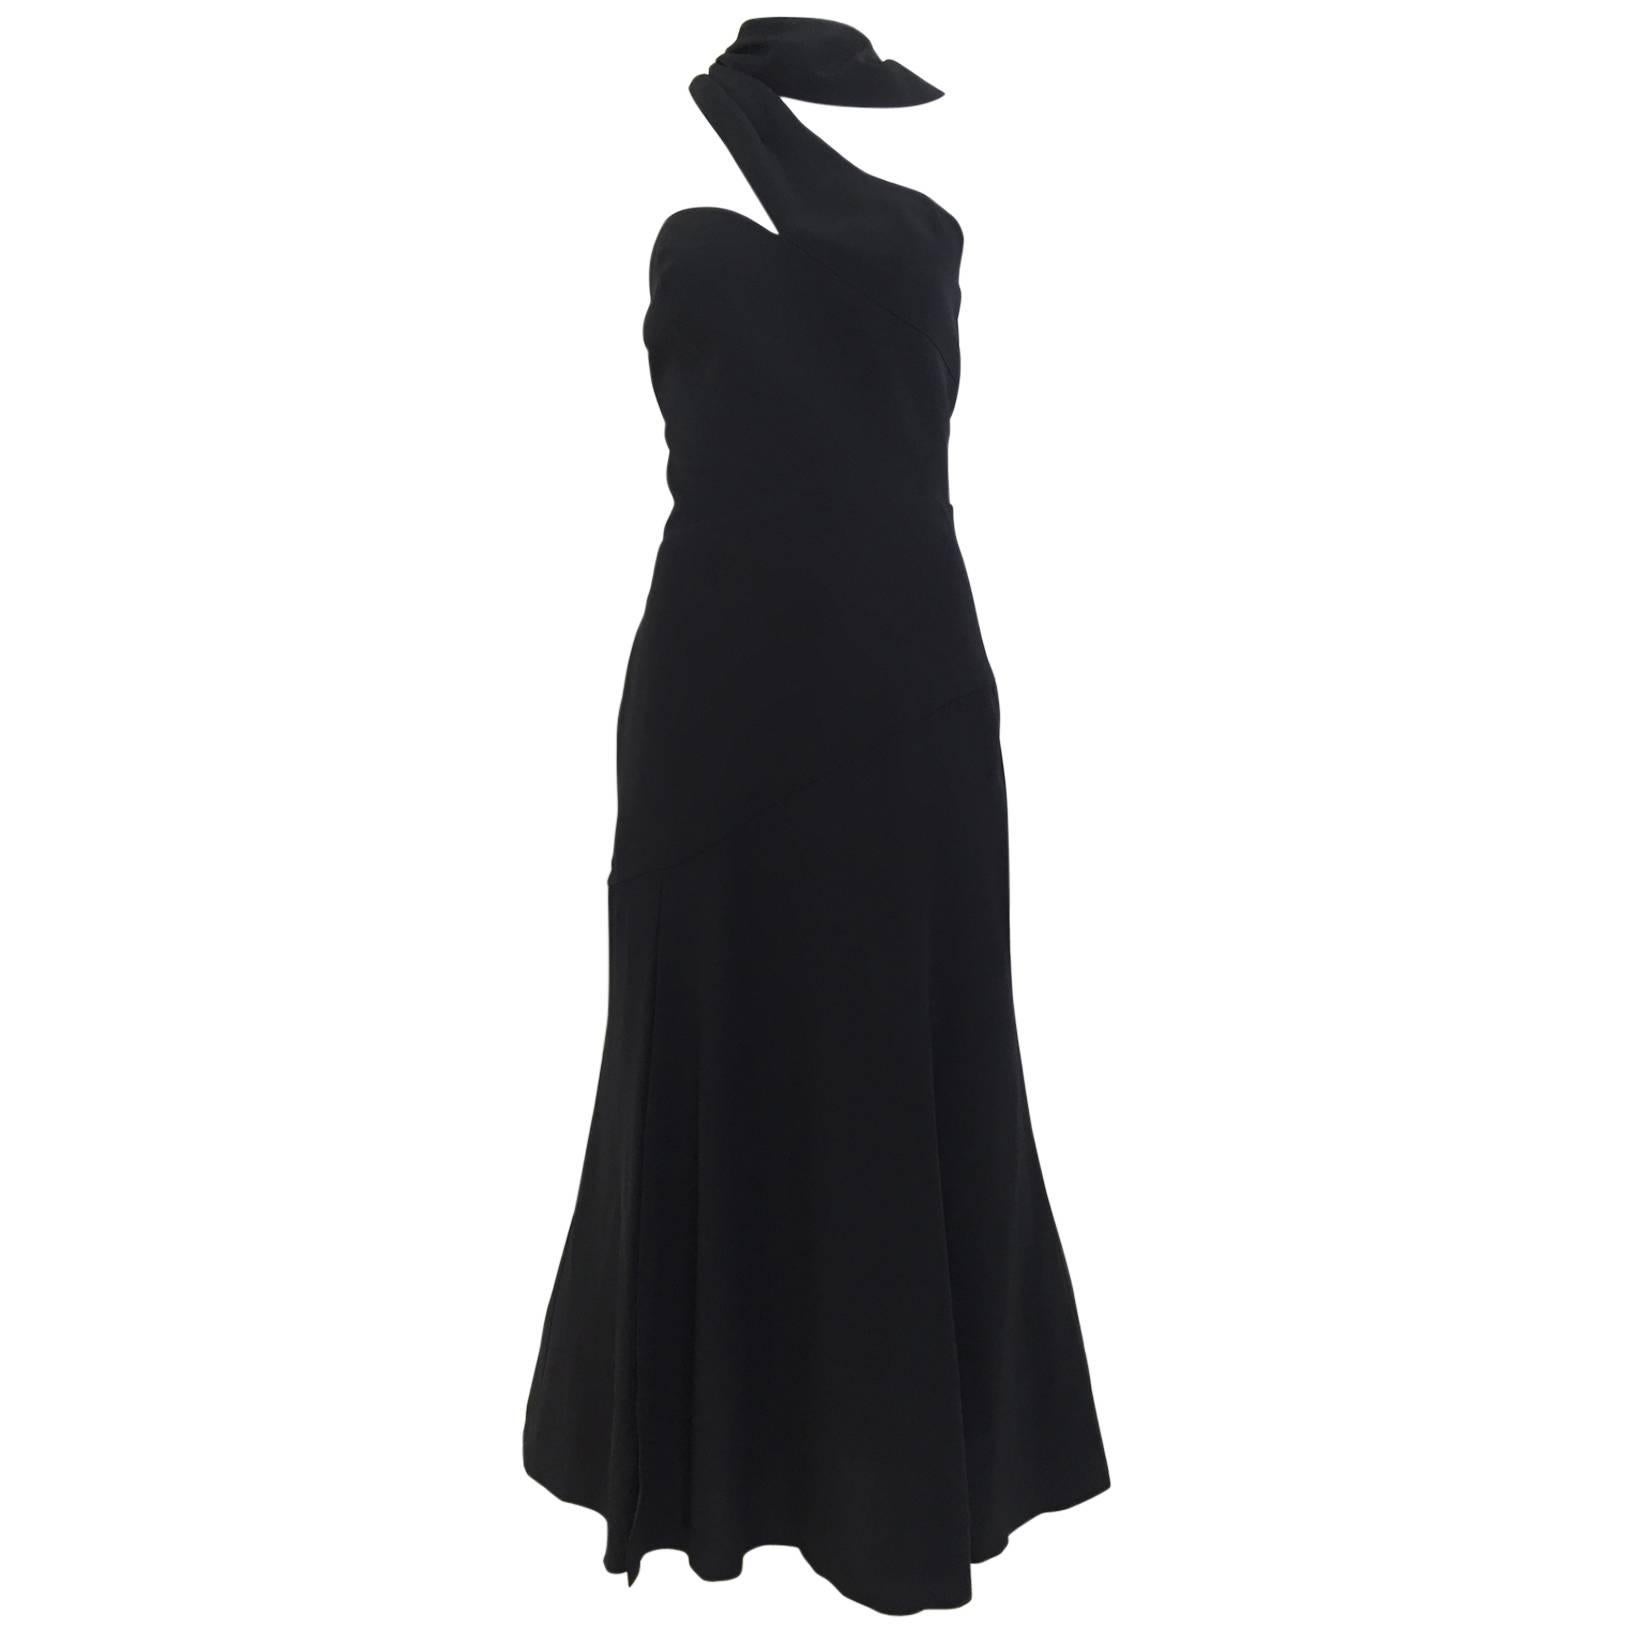  1990s THIERRY MUGLER Black Dress with Cut Out Asymetrical neckline  For Sale